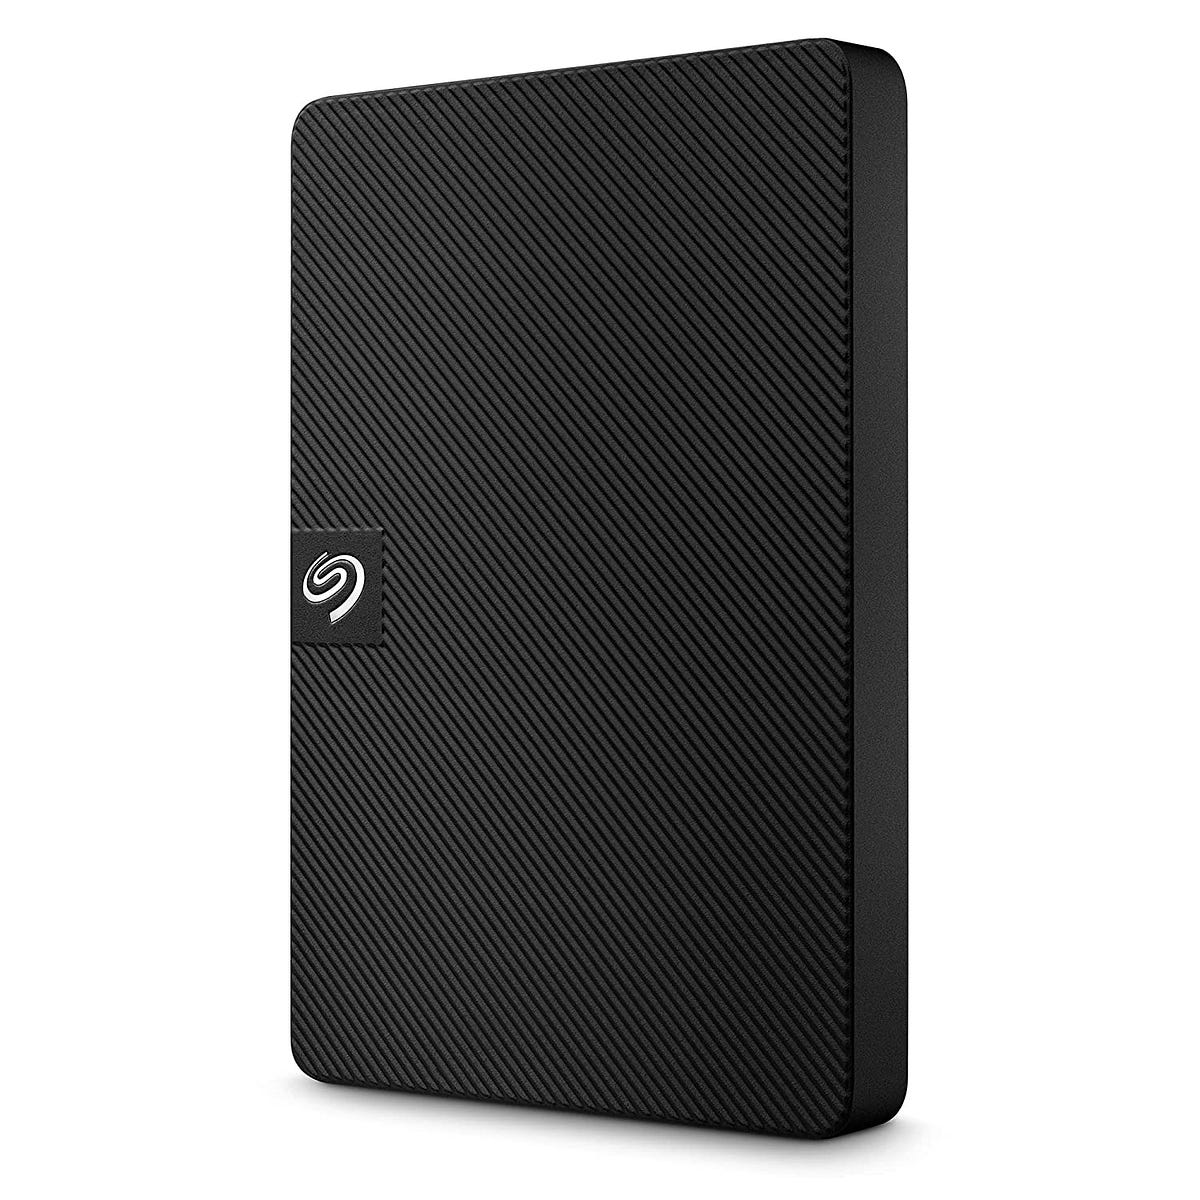 Seagate Expansion 1TB External HDD — USB 3.0 for Windows and Mac with 3 yr  Data Recovery Services, Portable Hard Drive (STKM1000400) - Nikeshsahu -  Medium